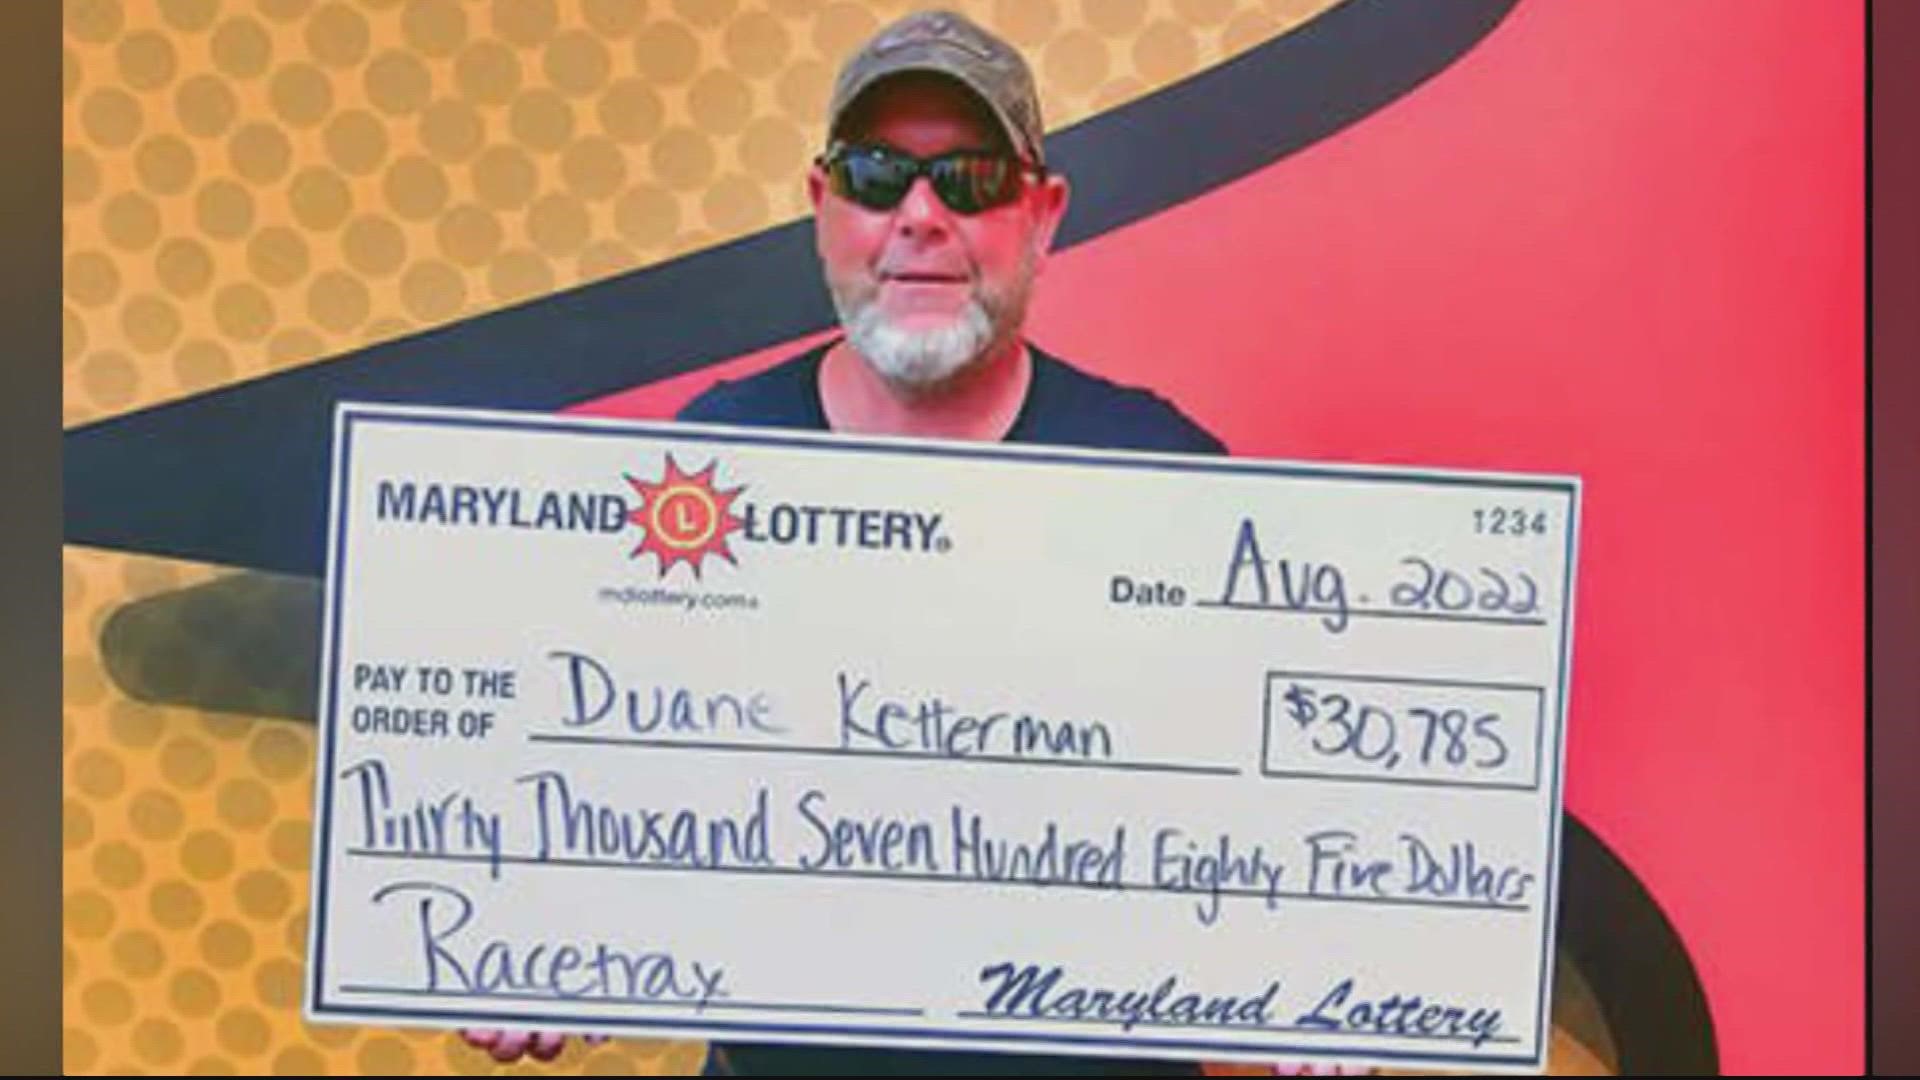 Powerline technician Duane Ketterman regularly crosses the state line to work in Maryland and buys lottery tickets on his visits, according to a news release.